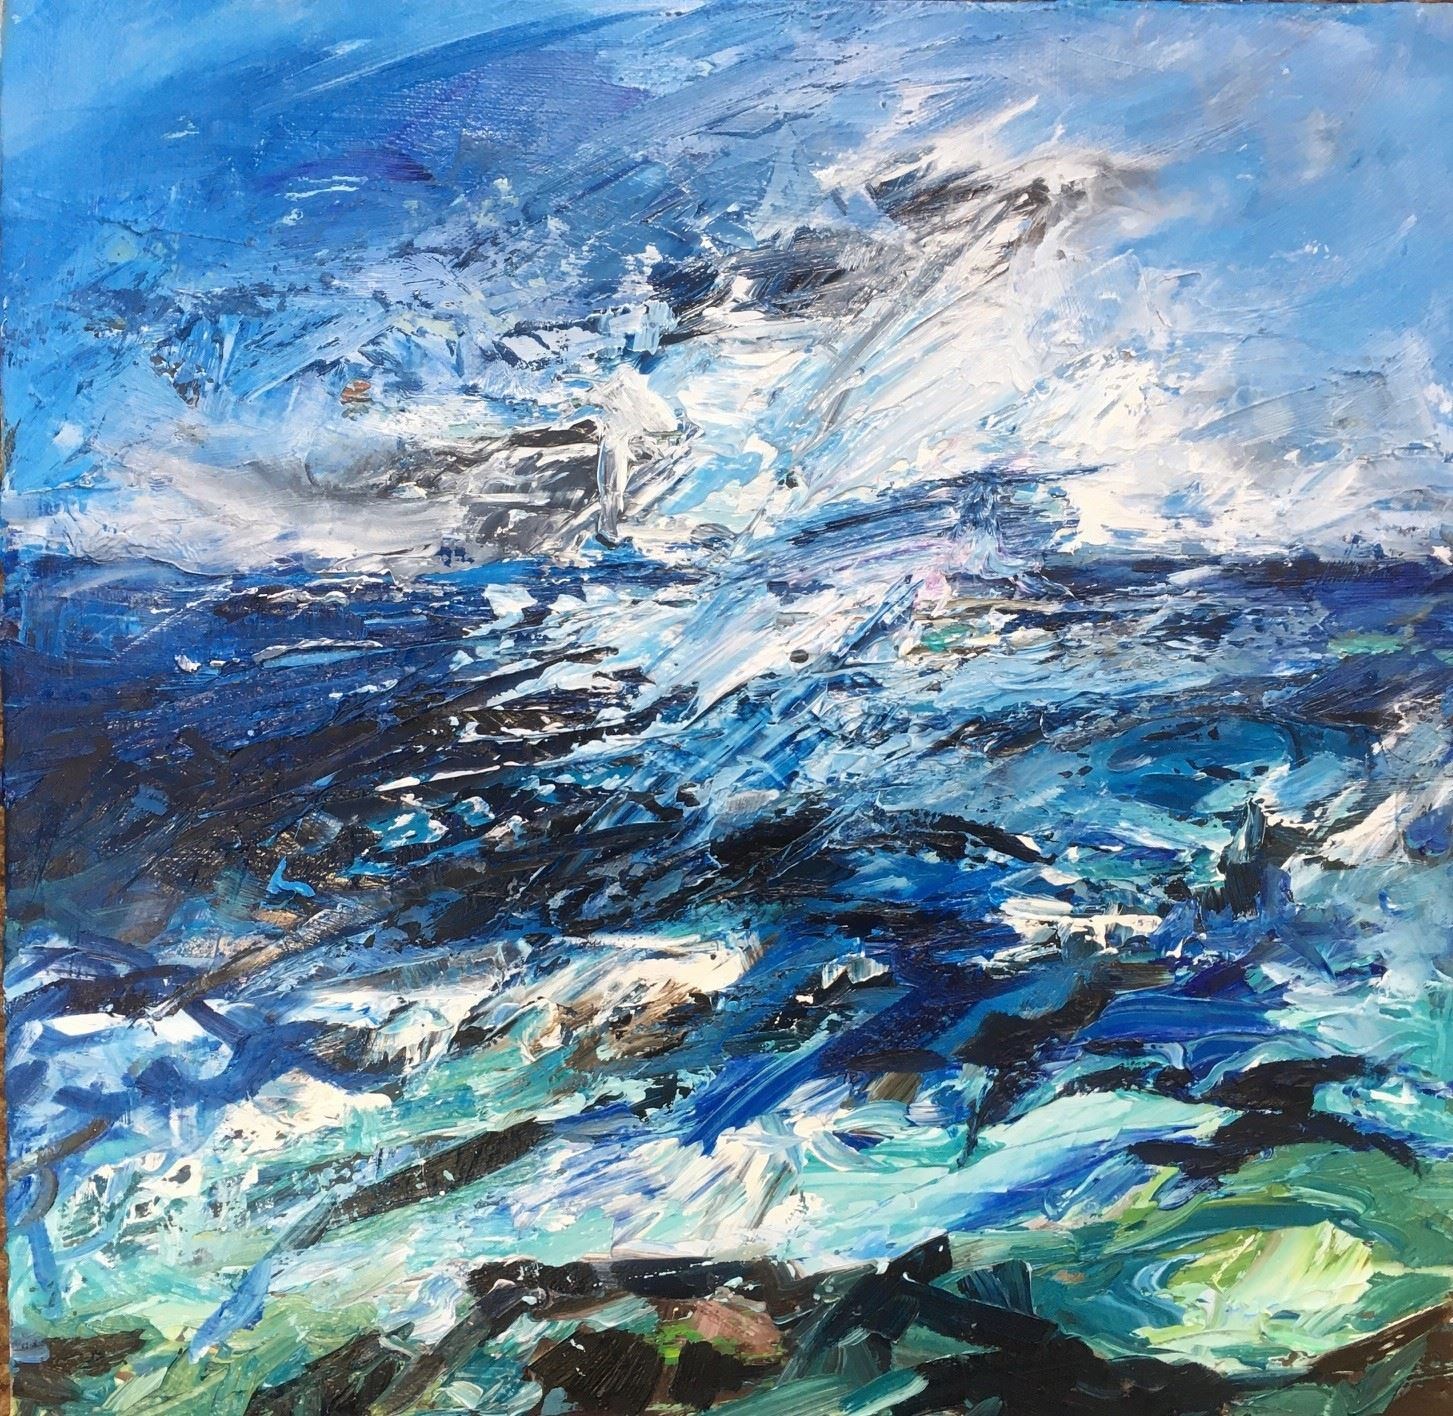 Spring Waters, by Clare Blois - currently part of the Kingussie exhibition